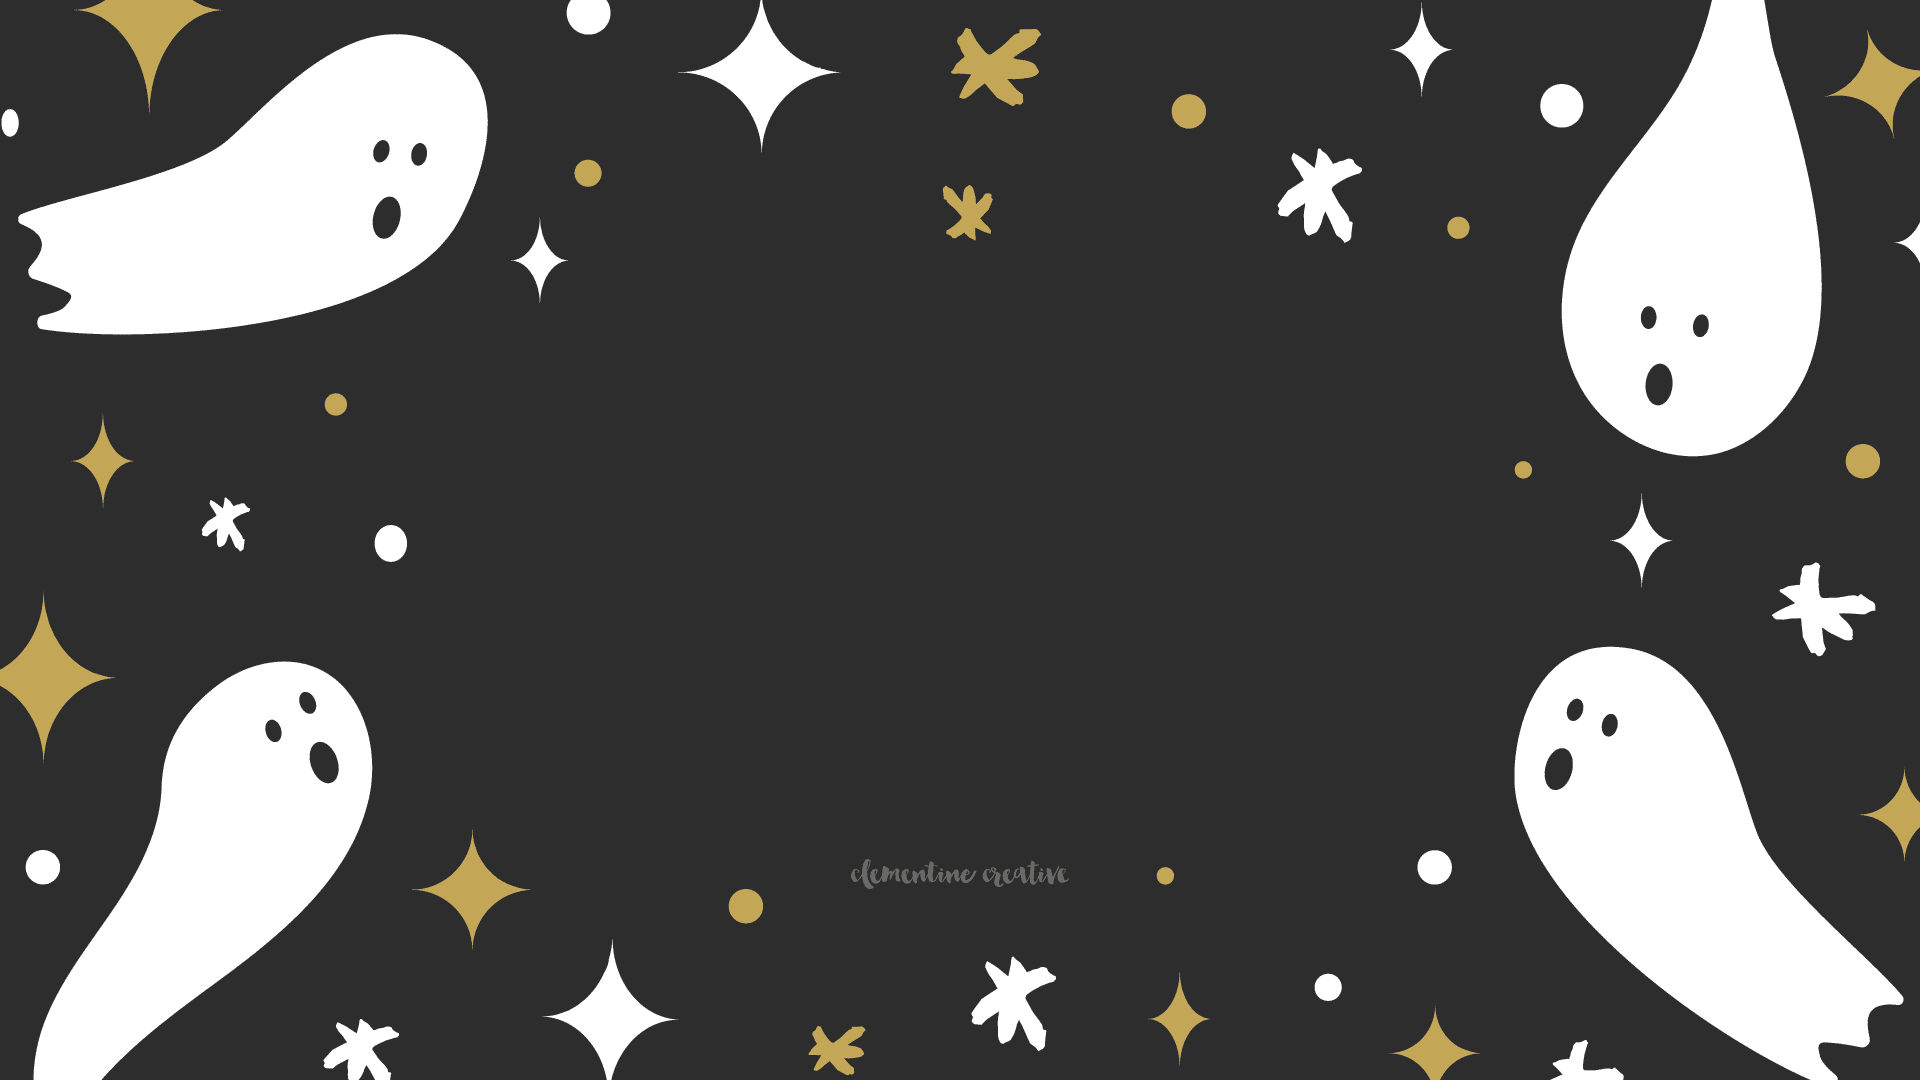 A black background with white ghosts and stars - Halloween desktop, Halloween, spooky